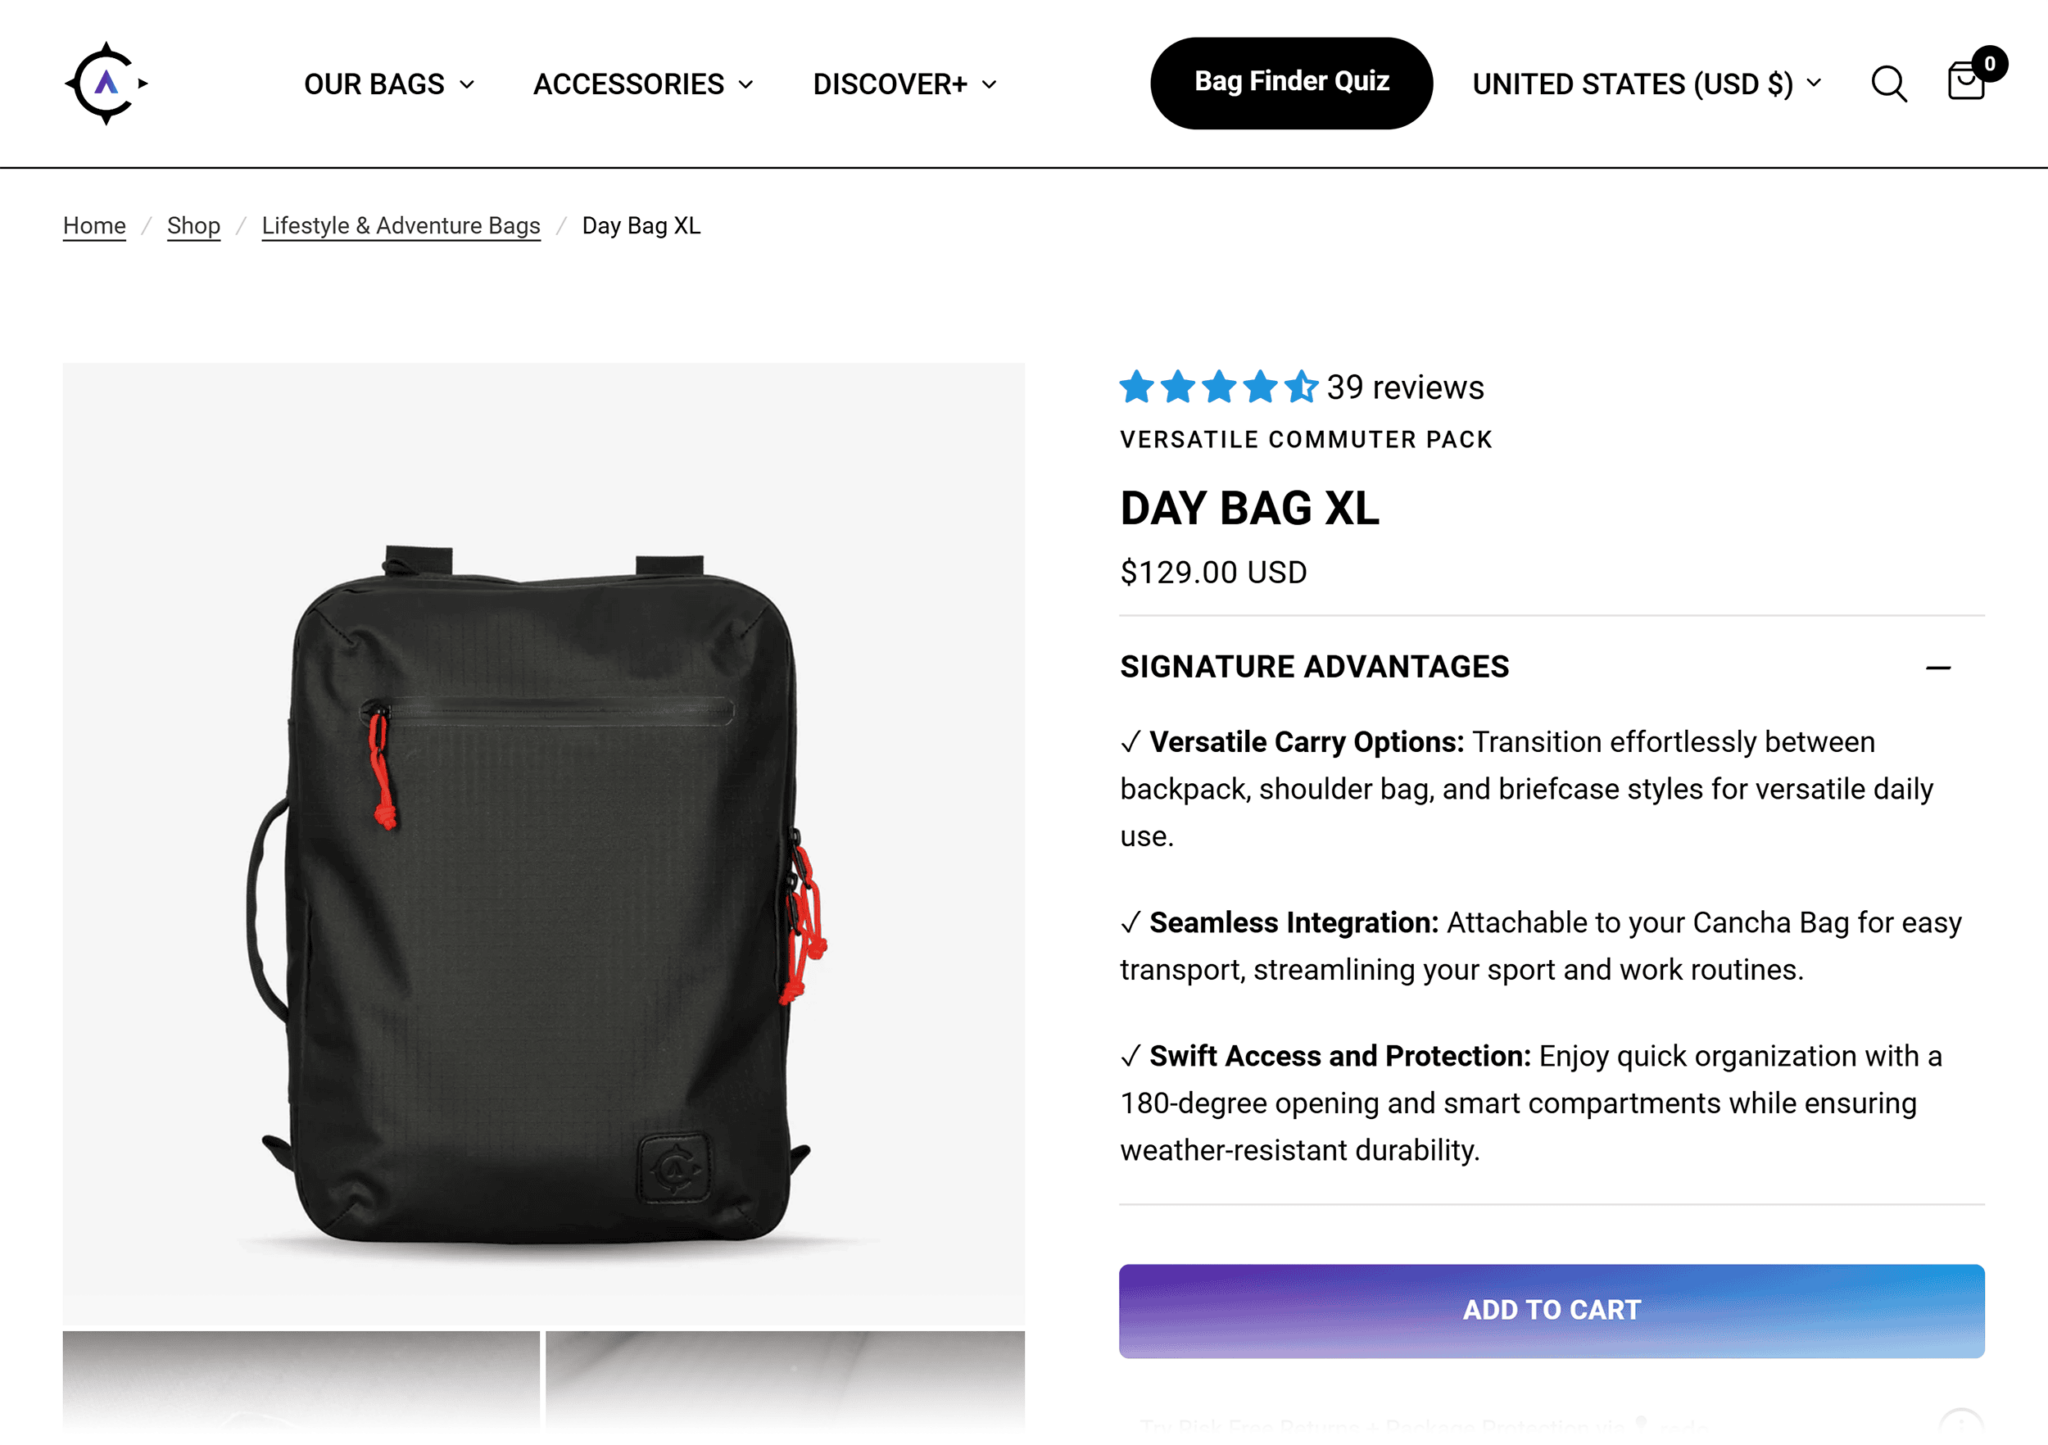 canchabags-day-bag-xl 20 Effective Product Page Examples (+ Best Practices)